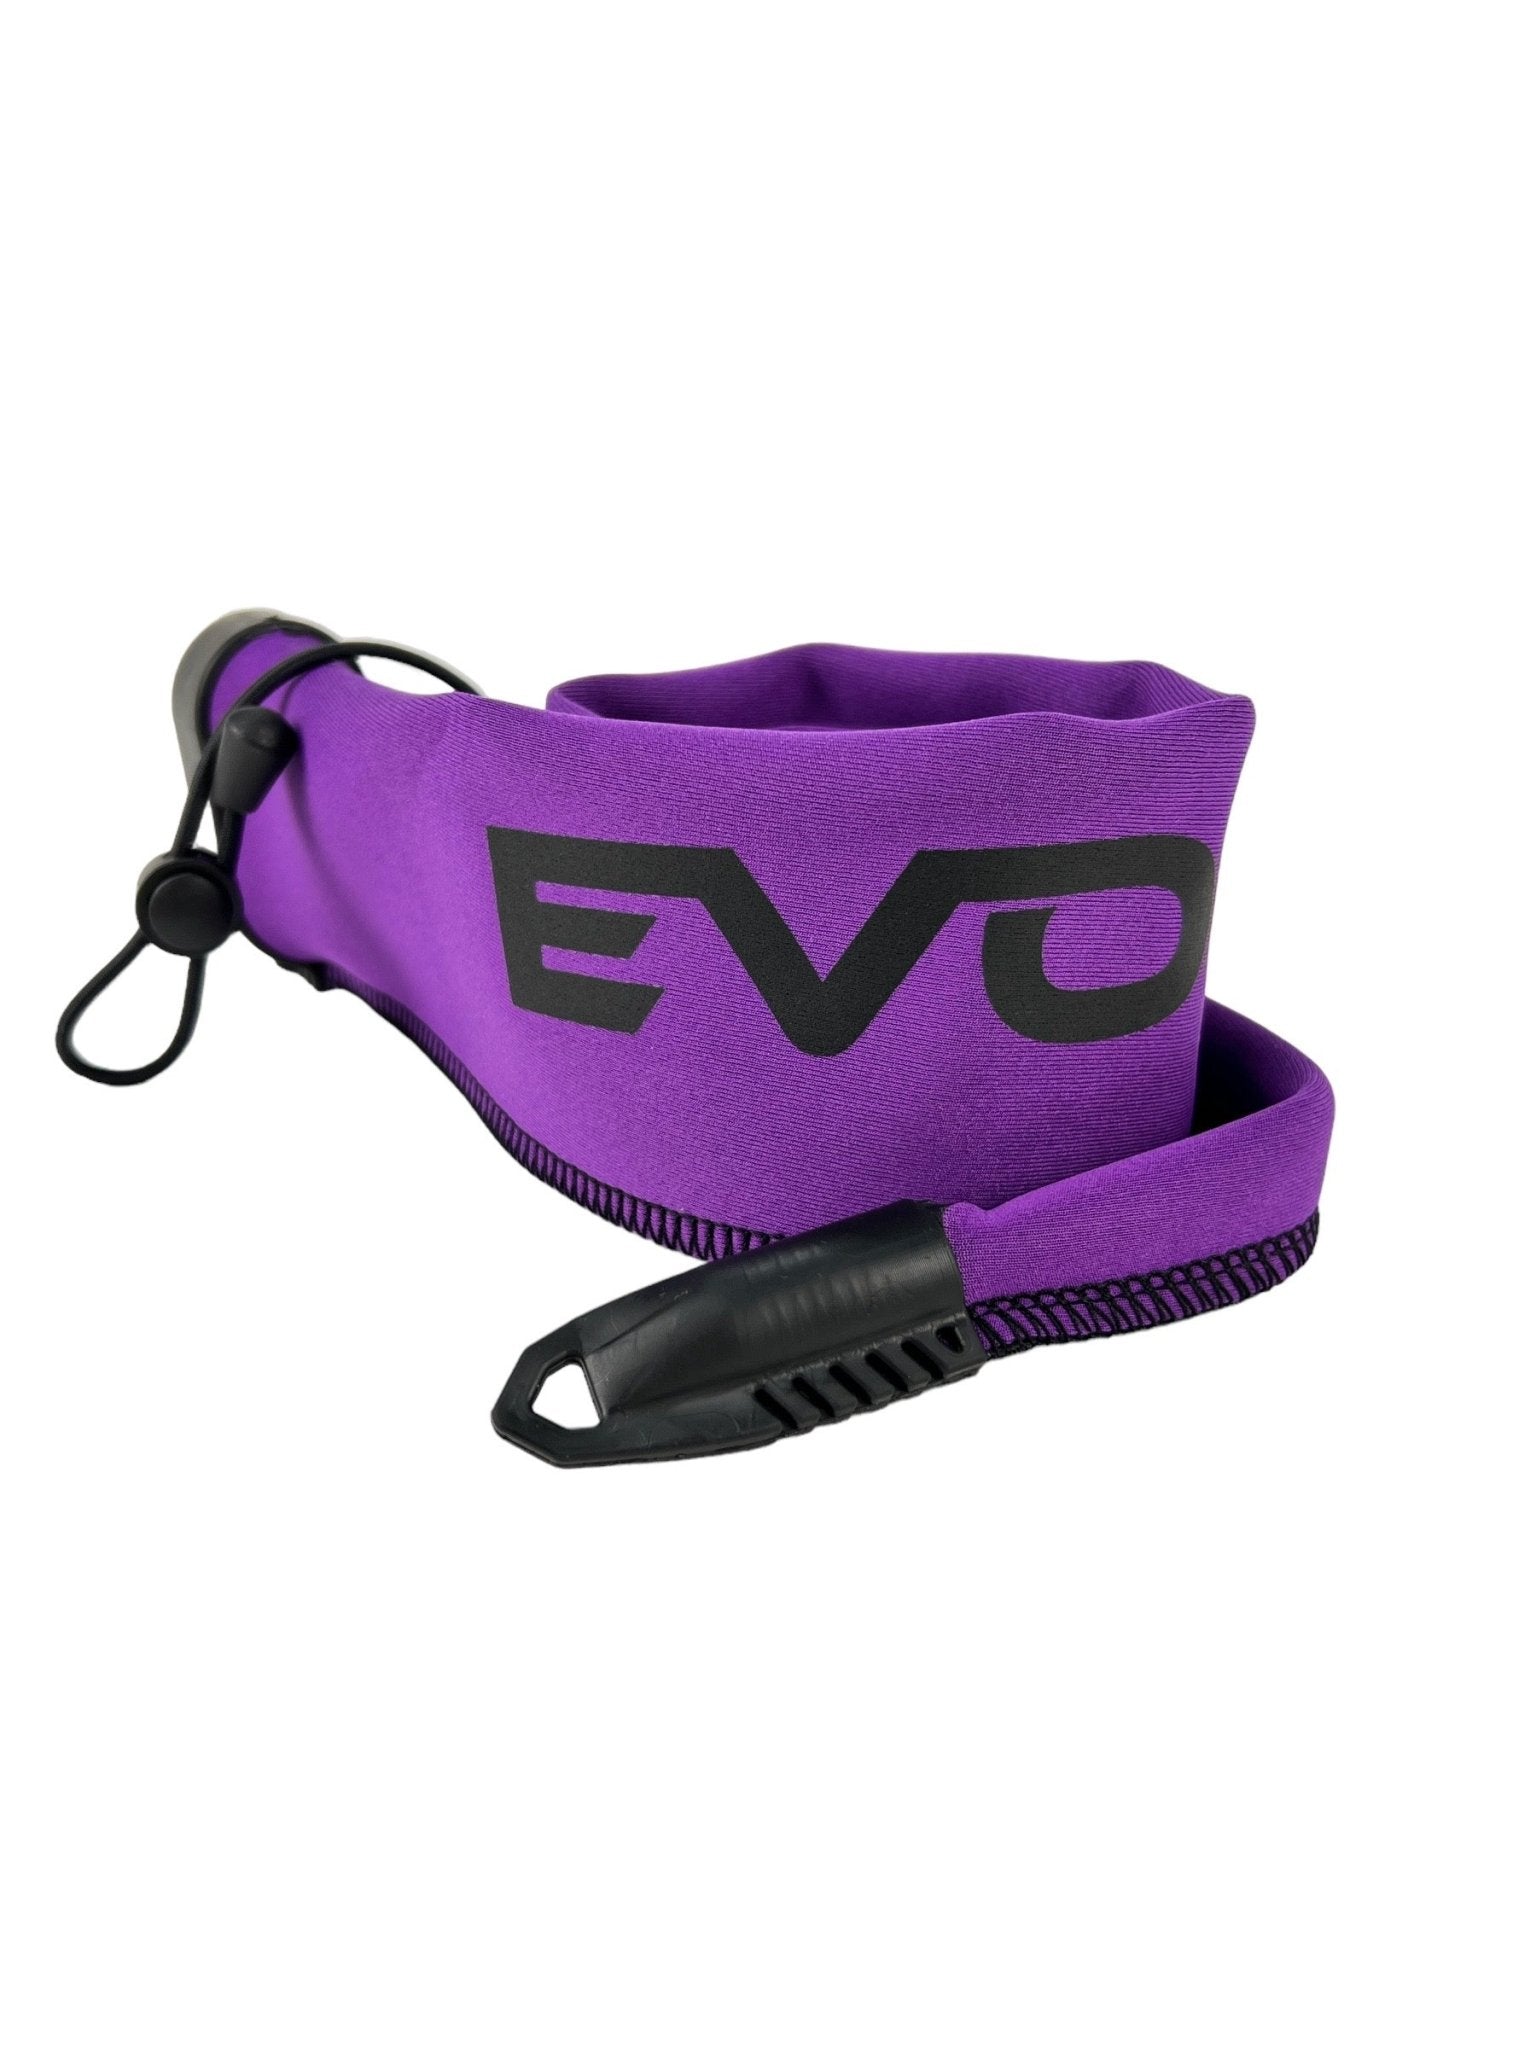 EVOLV - Limited Edition - Spinning Rod Sleeves - Angler's Pro Tackle & Outdoors